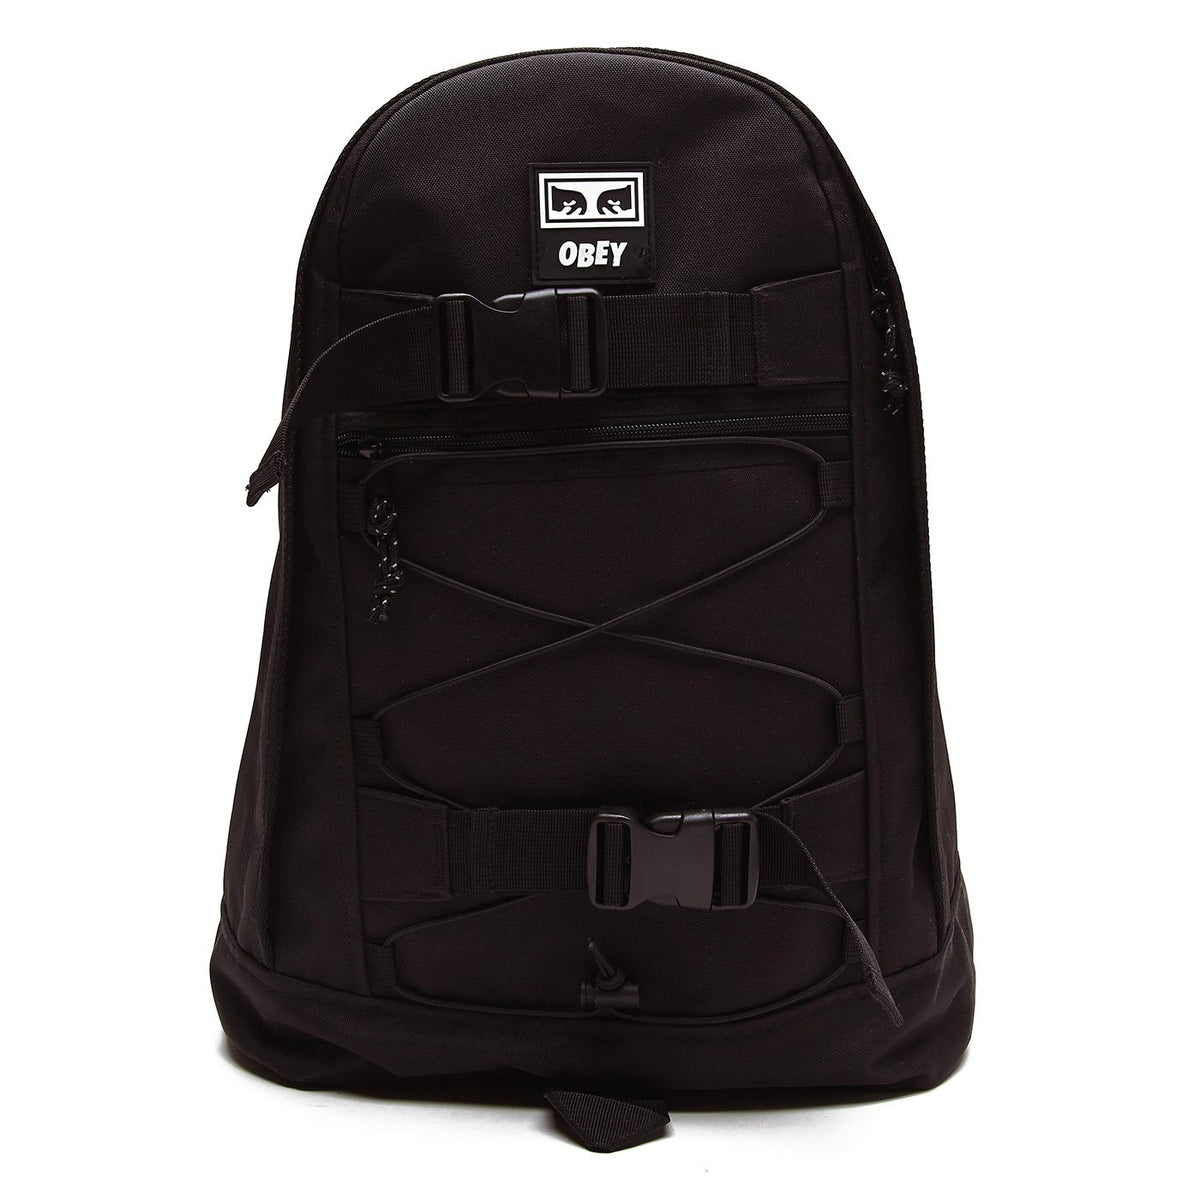 OBEY - Conditions Utility Day Pack Bag, Black